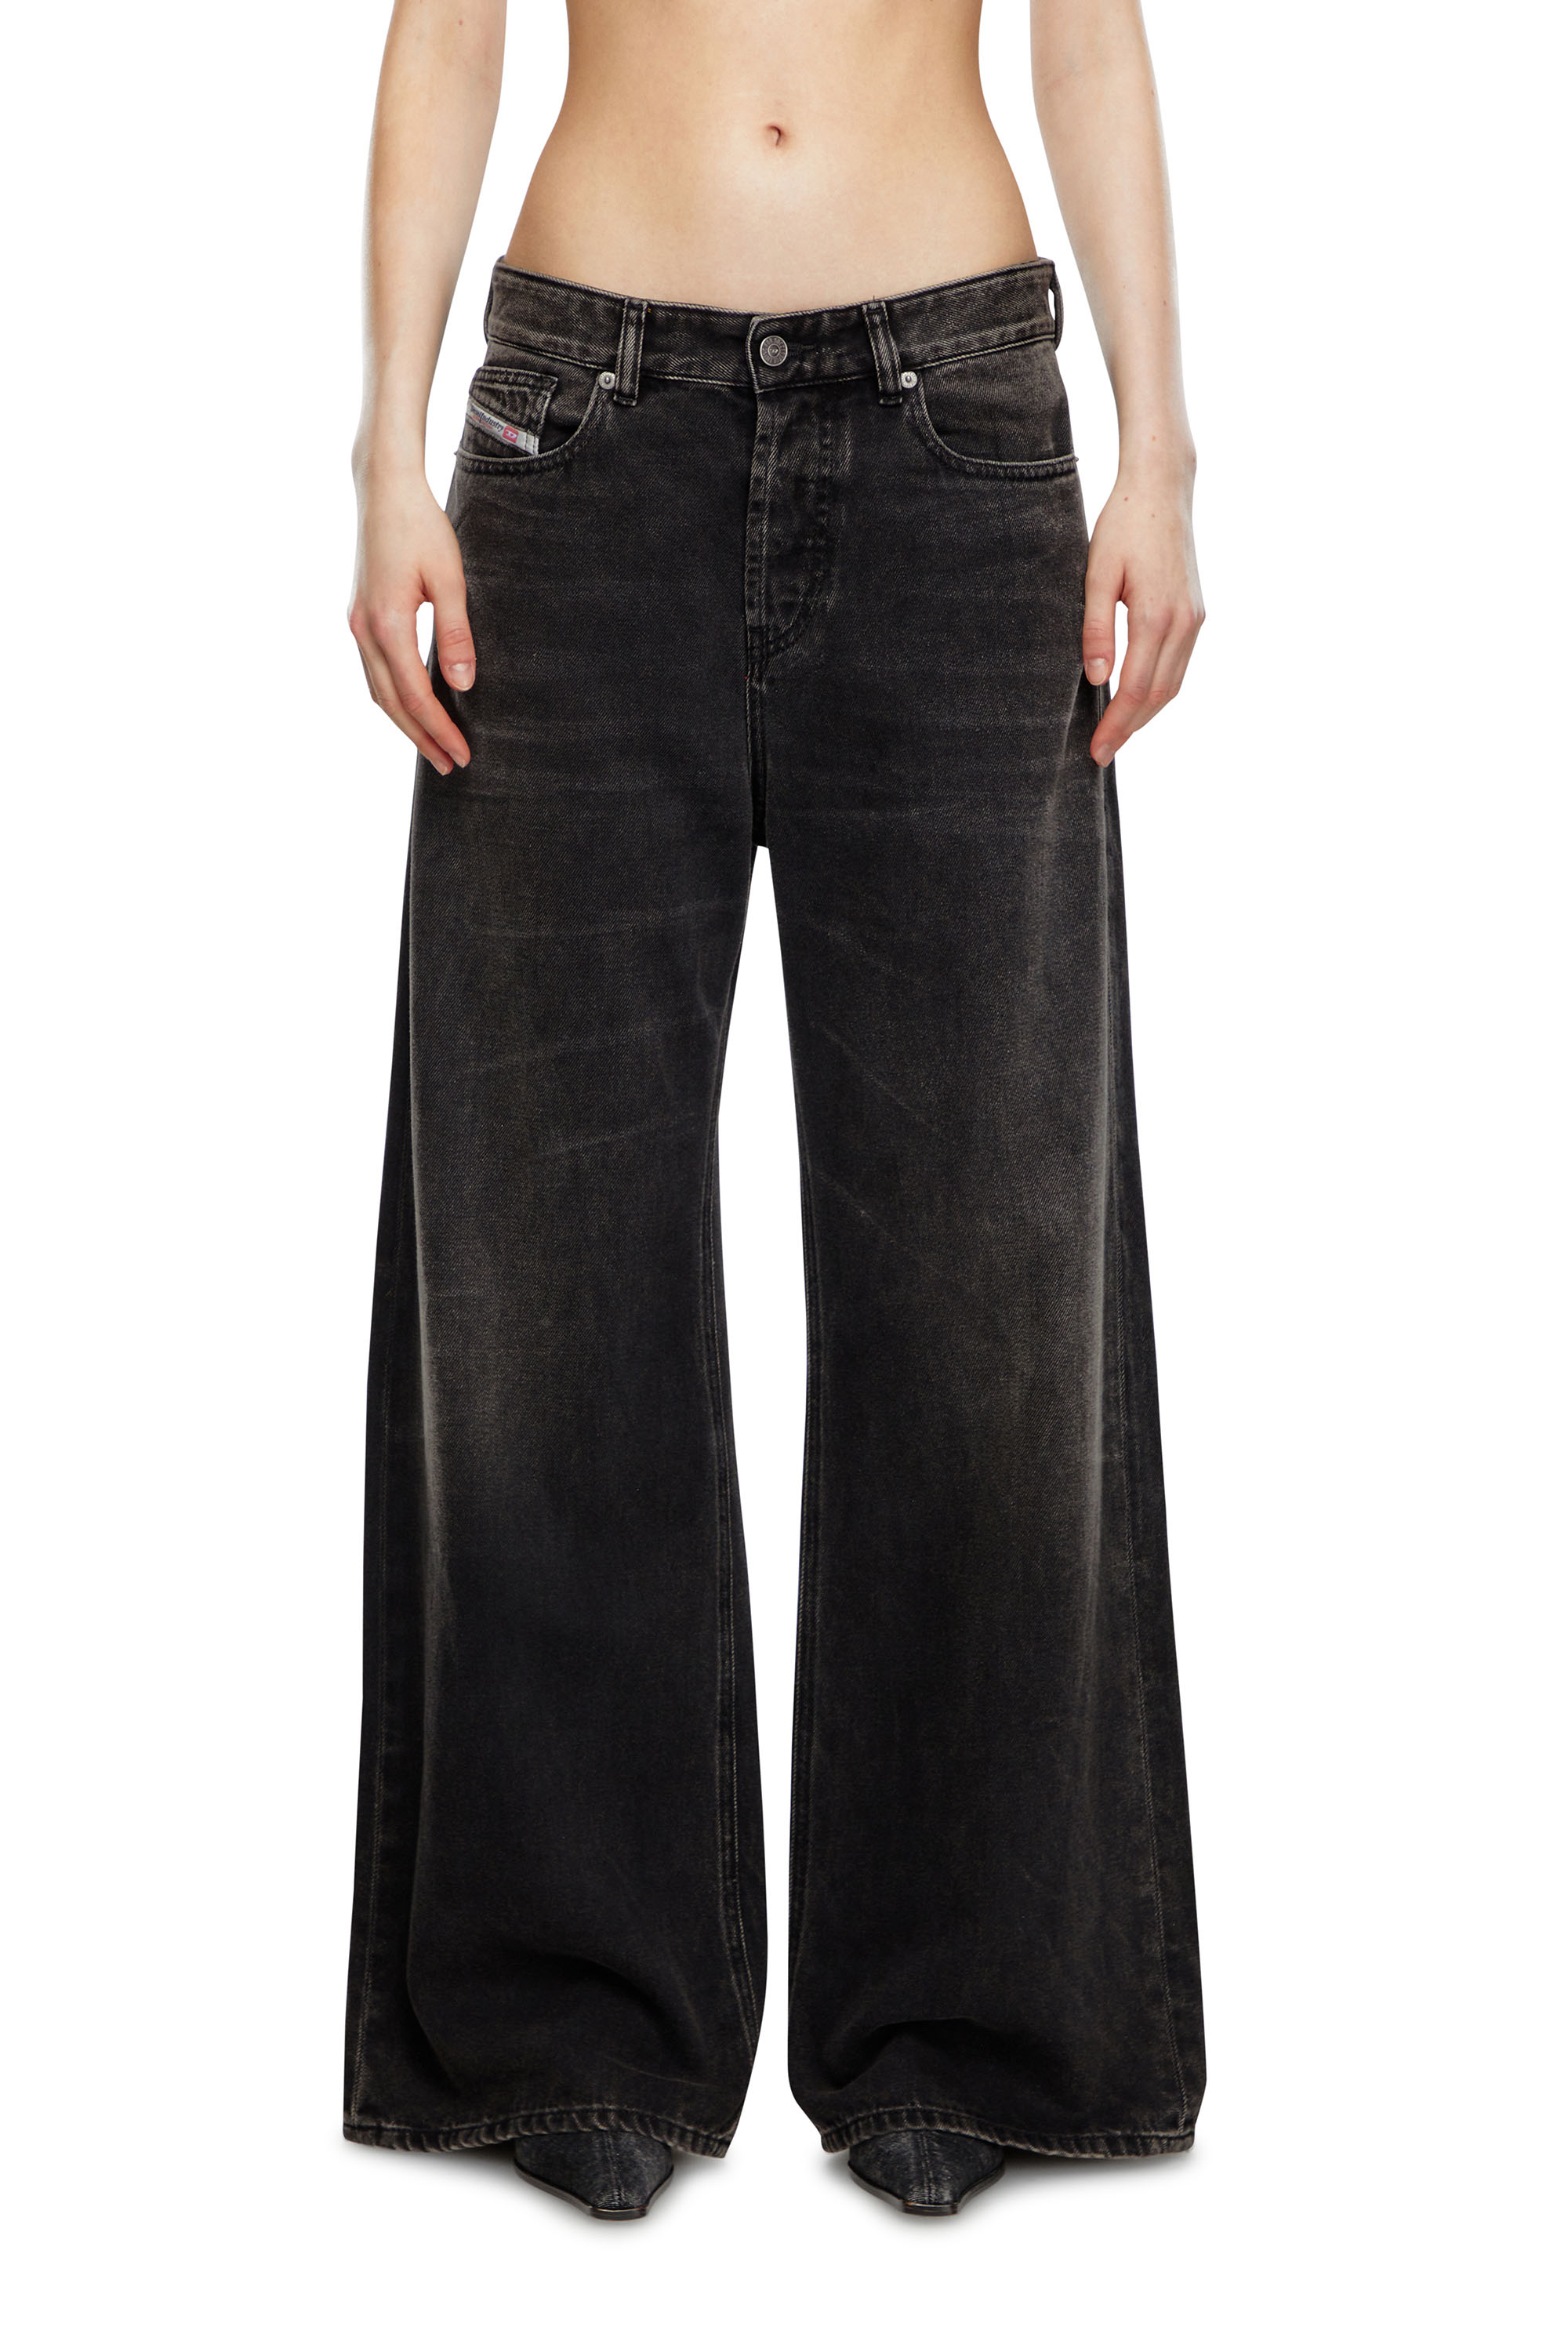 Diesel - Straight Jeans 1996 D-Sire 09J96, Mujer Straight Jeans - 1996 D-Sire in Negro - Image 2